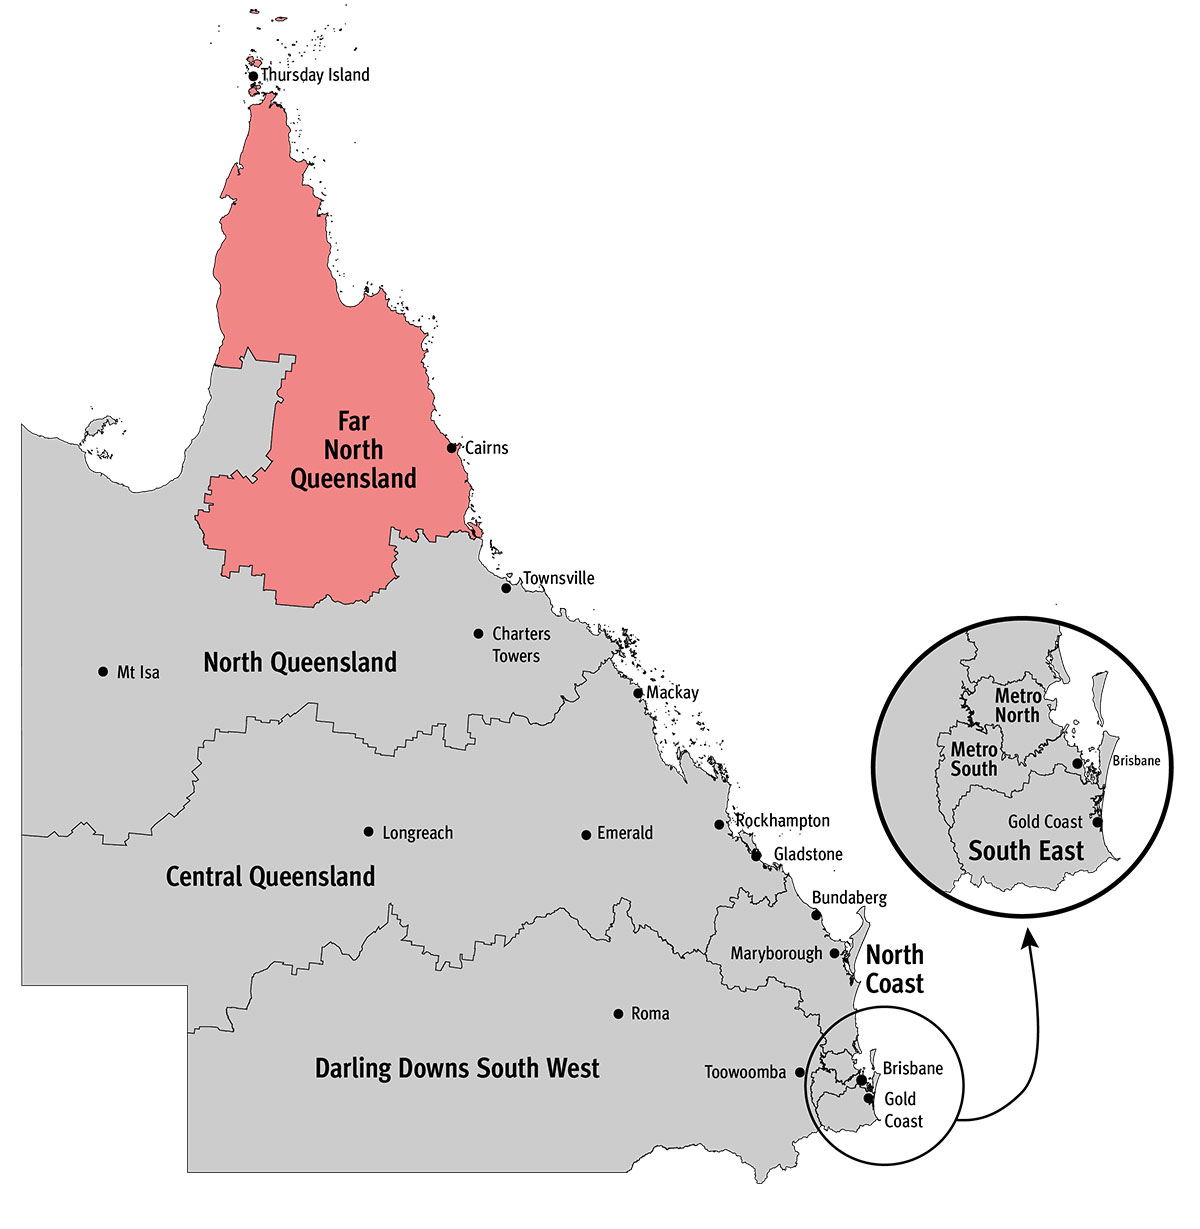 Queensland map with Far North Queensland region highlighted. Thursday Island and Cairns are included in this region.